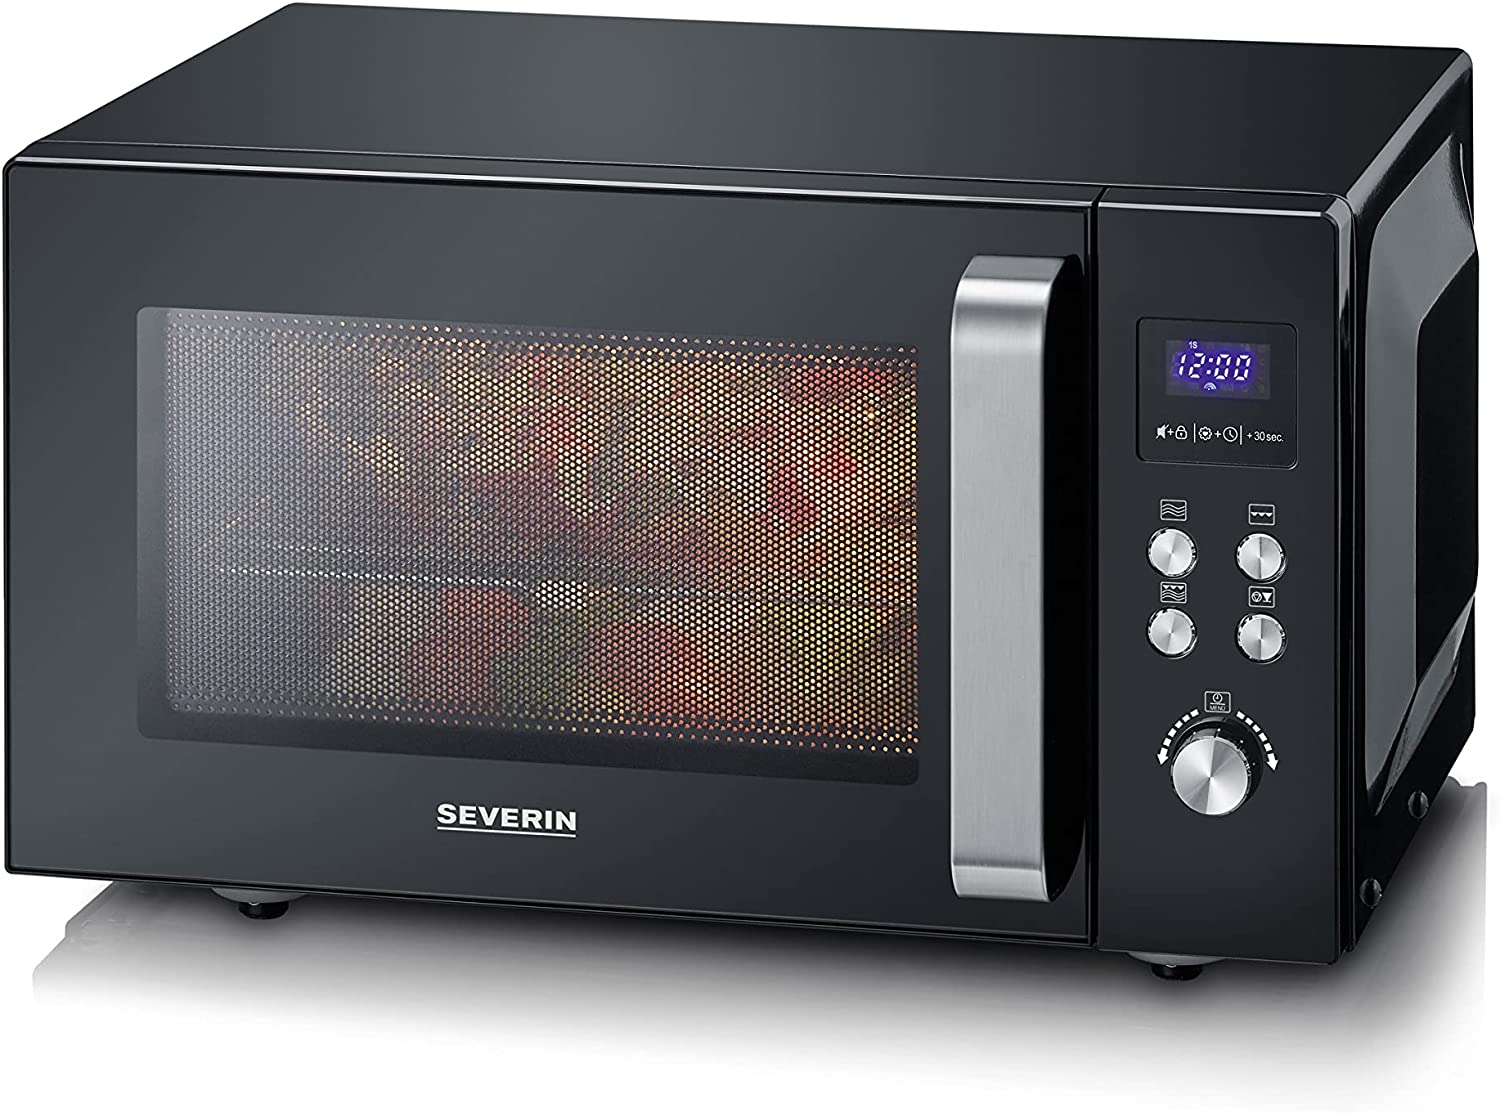 SEVERIN 2-in-1 Microwave with Ceramic Base and Grill, Microwave Device for 